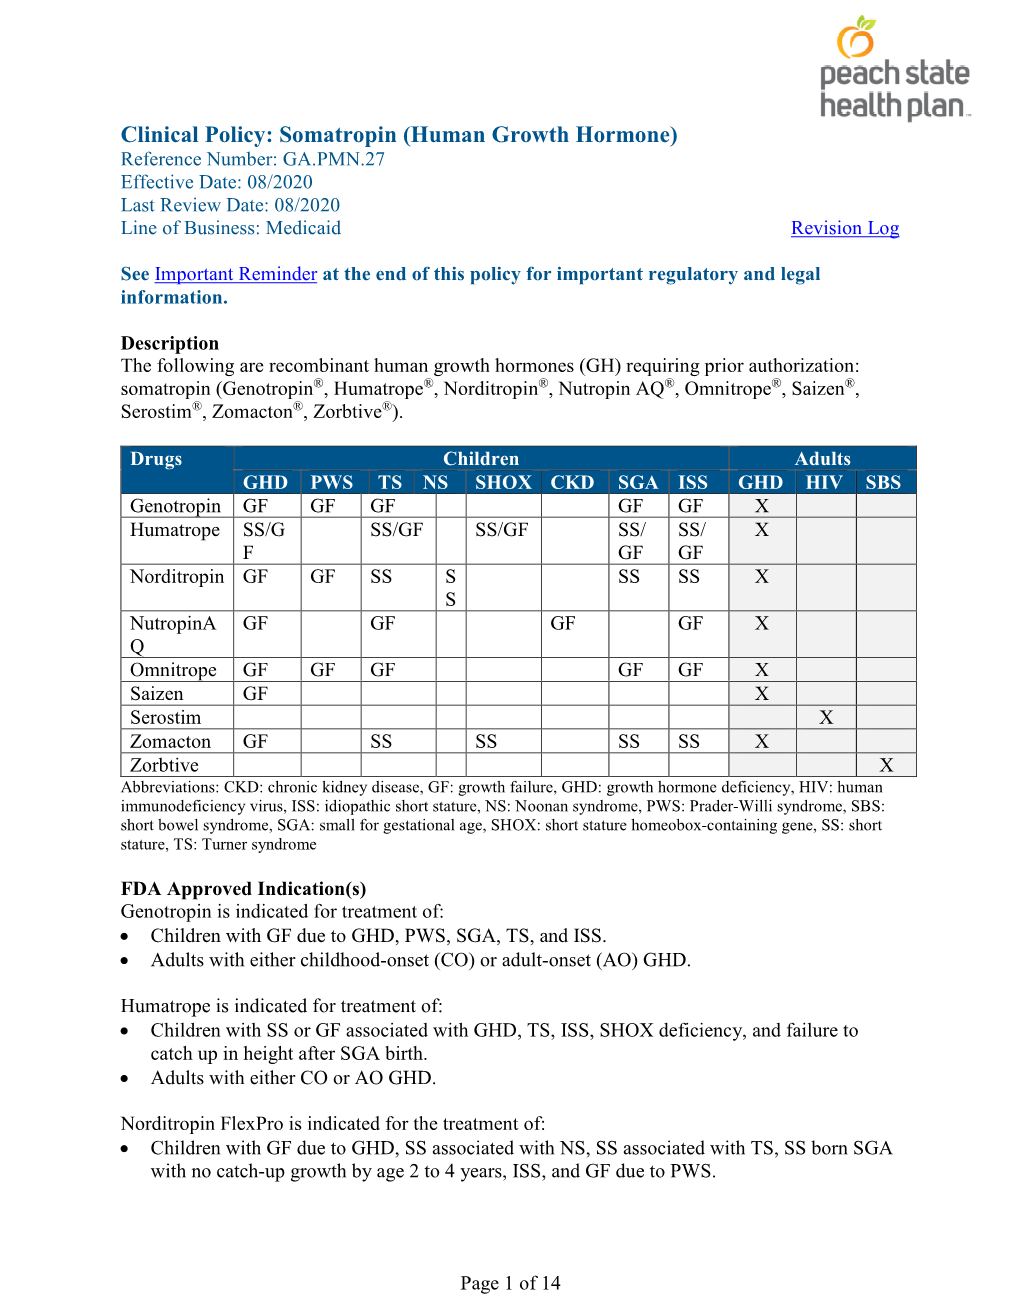 Somatropin (Human Growth Hormone) Reference Number: GA.PMN.27 Effective Date: 08/2020 Last Review Date: 08/2020 Line of Business: Medicaid Revision Log